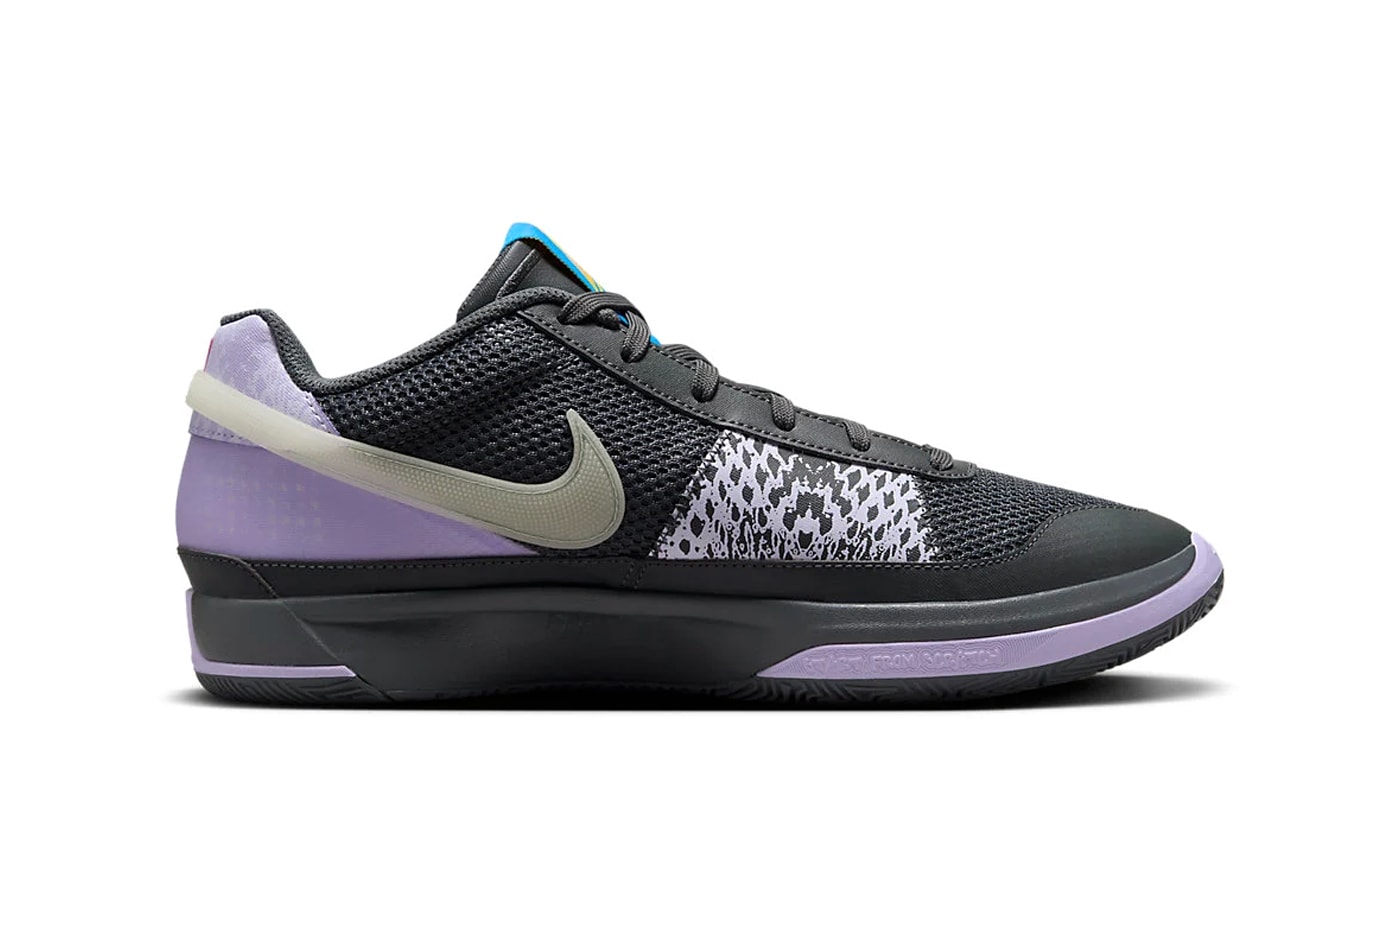 Official Look at the Nike Ja 1 "Personal Touch" Iron Grey/Lilac Bloom-Light Photo Blue-Multi-Color FV1288-001 release info 